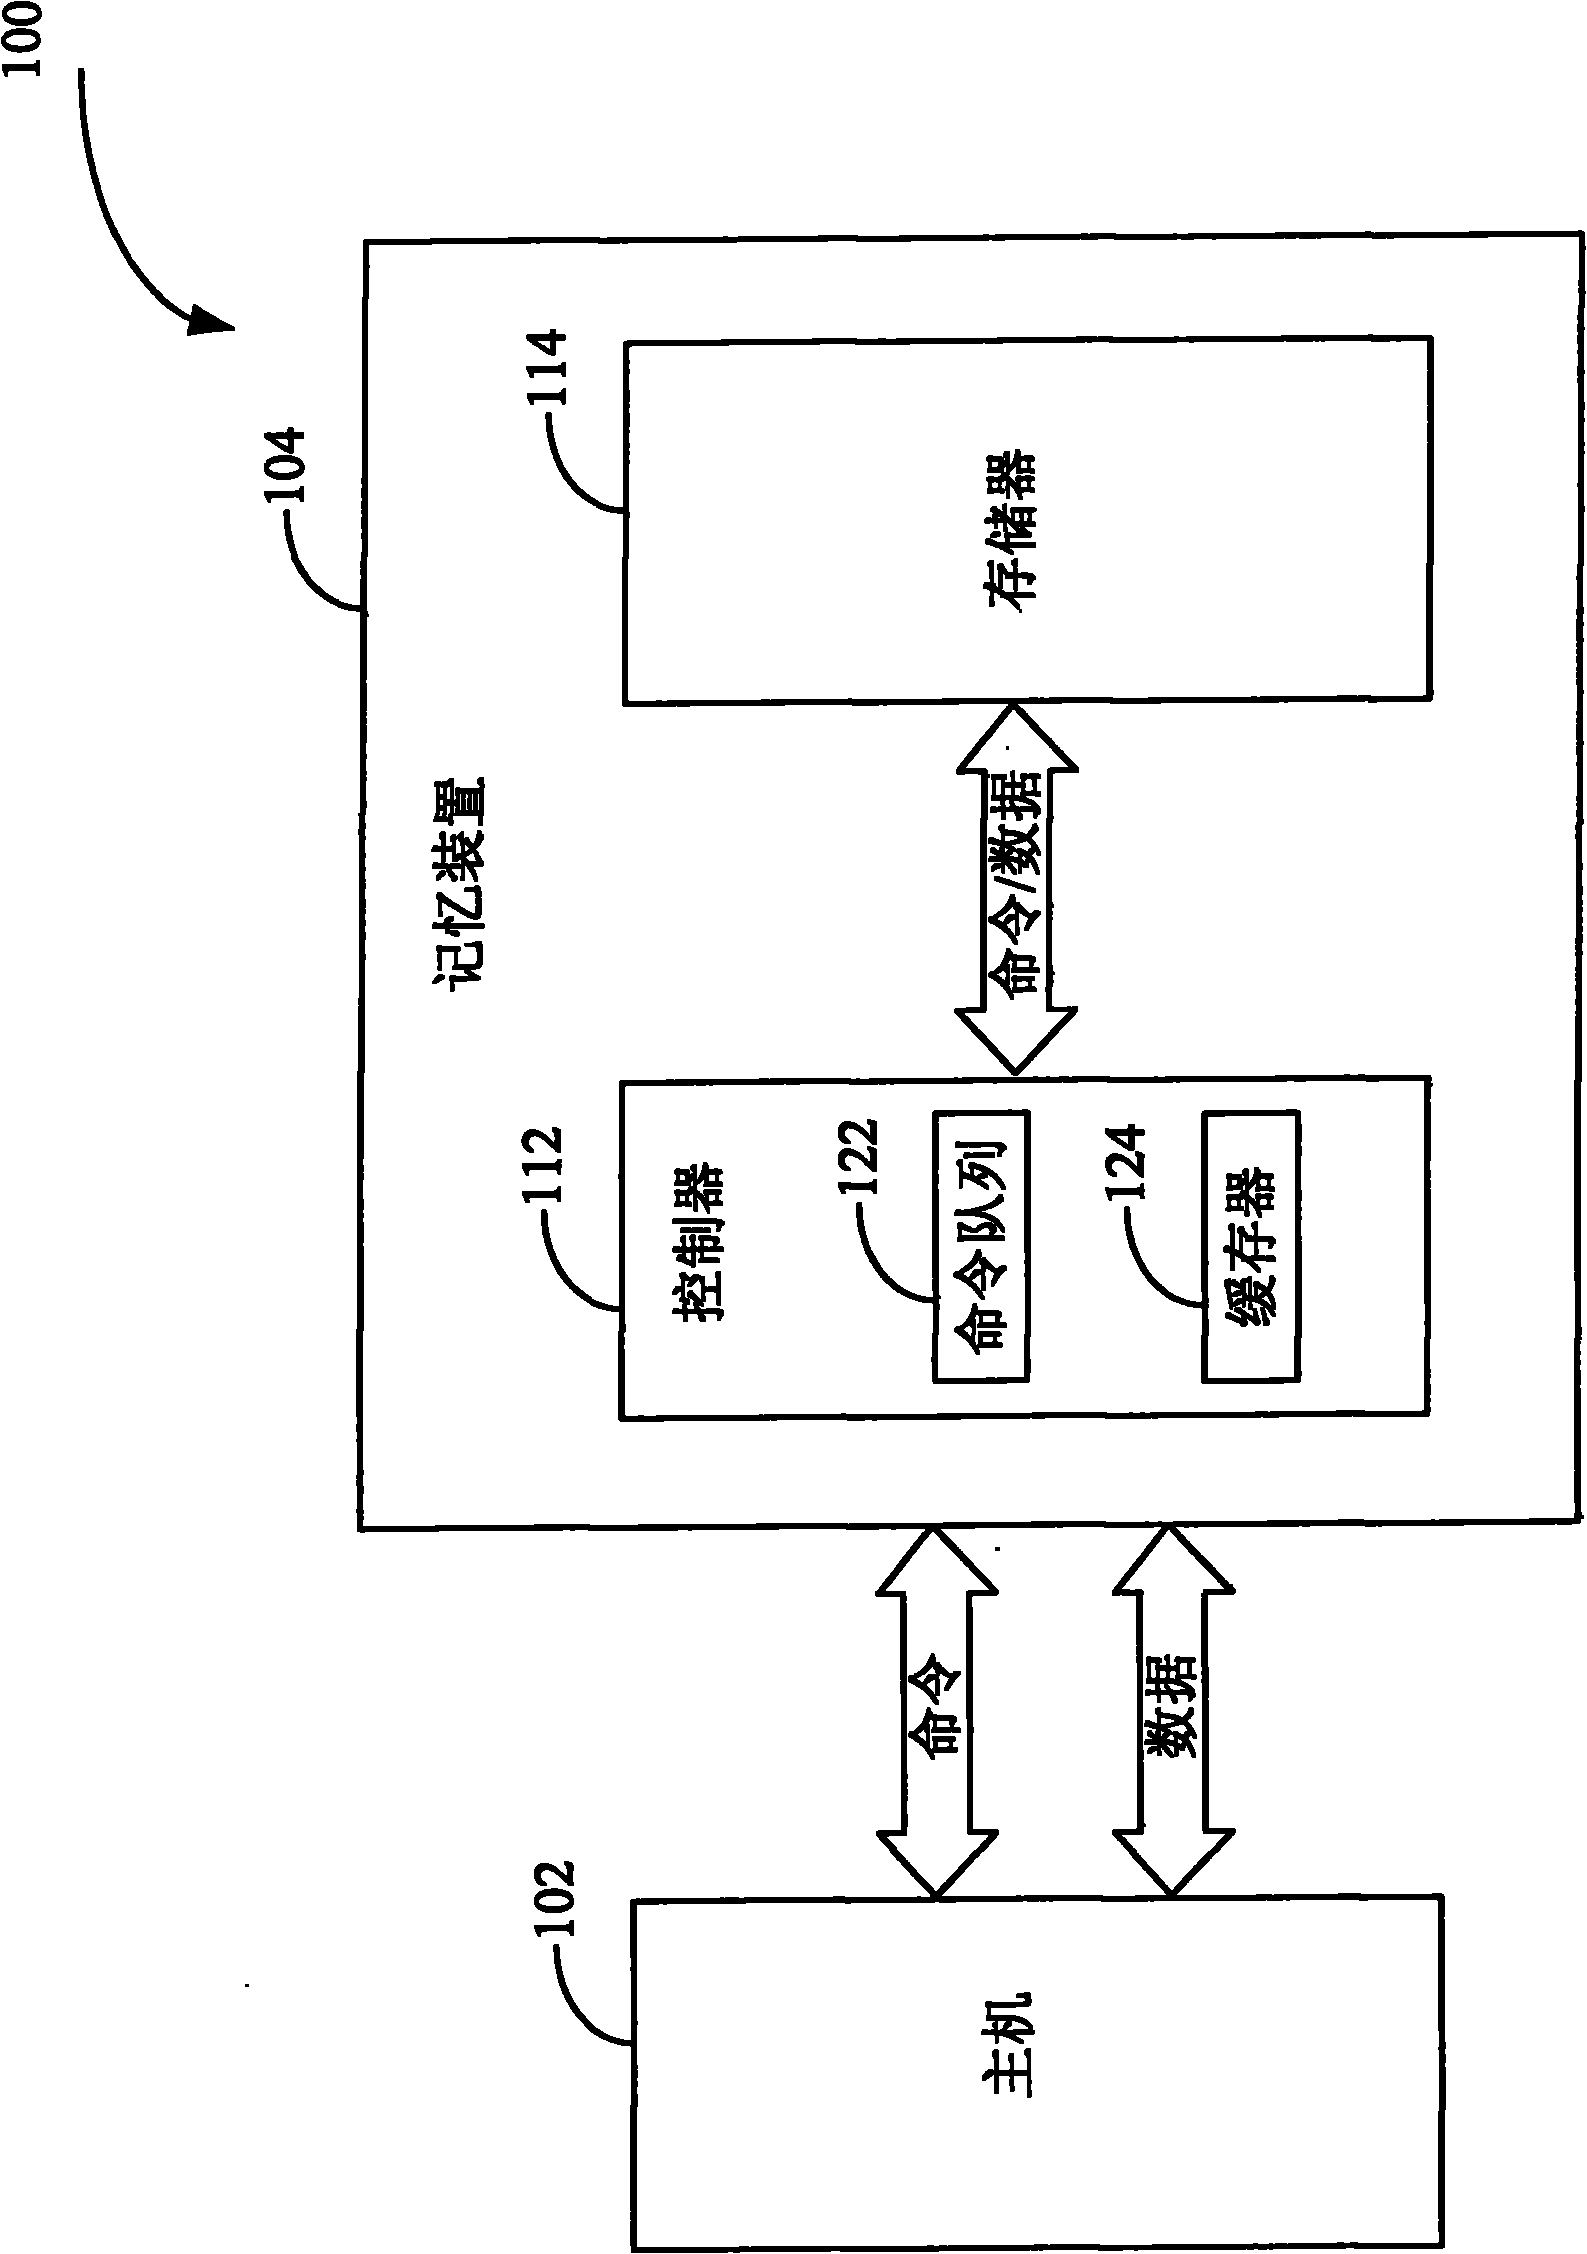 Memory device and data access method for memory unit